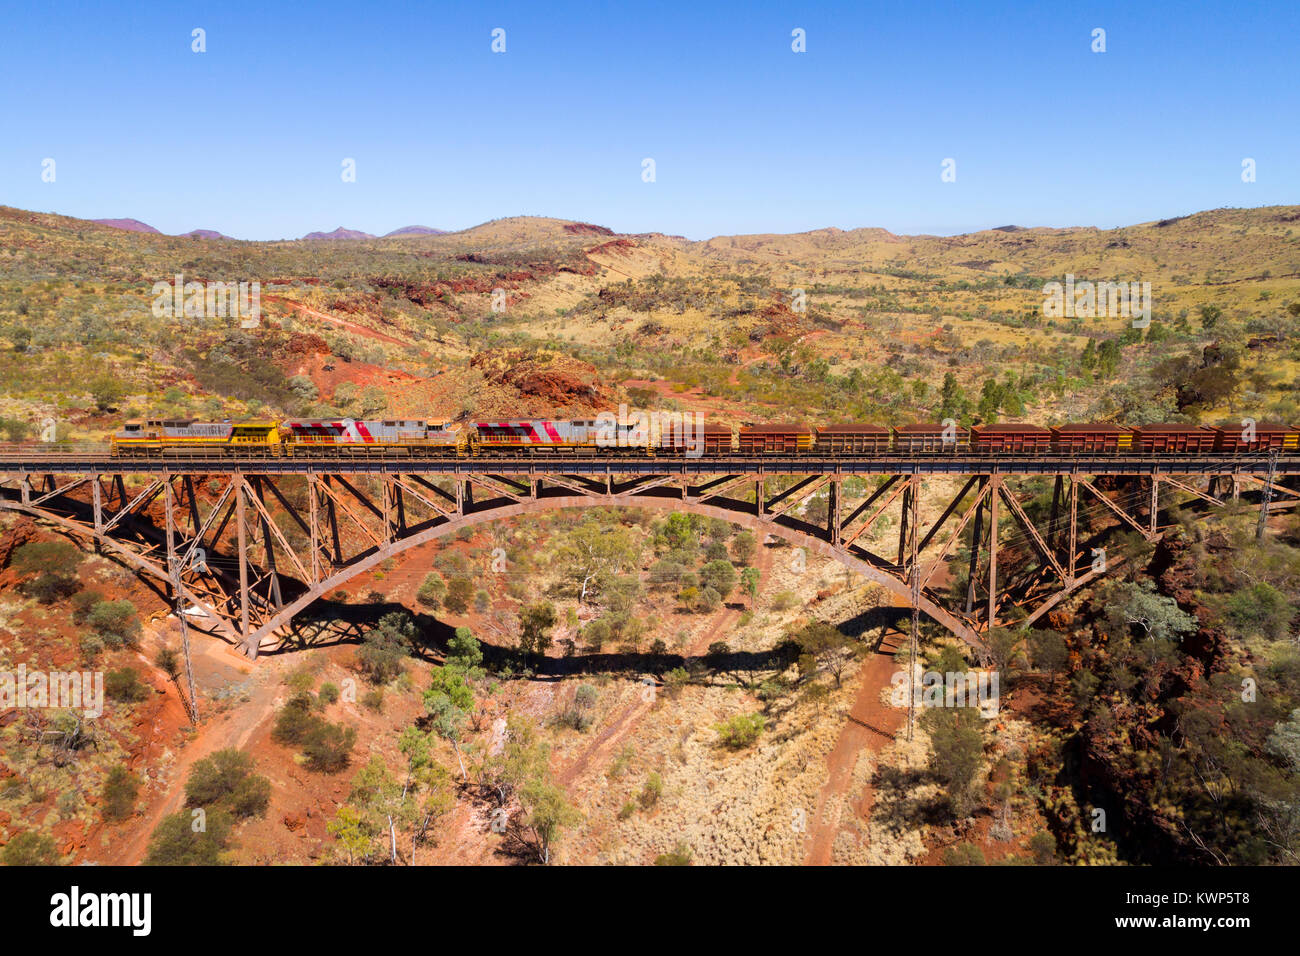 Iron Ore train crossing over the largest privately owned single span railway bridge in the southern hemisphere, Pilbara, Western Australia Stock Photo